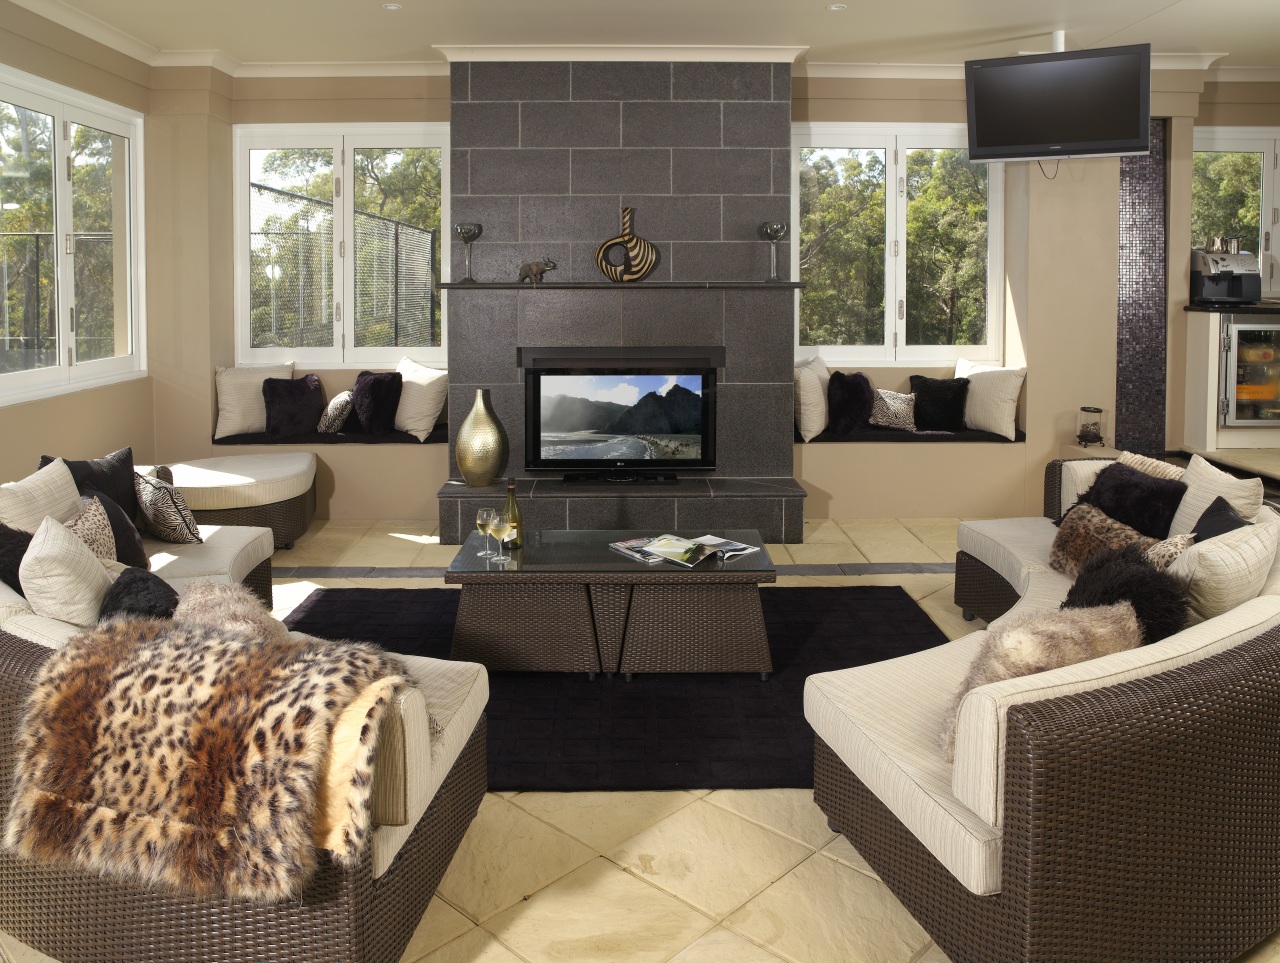 With the LCD television, the image colour and floor, furniture, hearth, home, interior design, living room, room, black